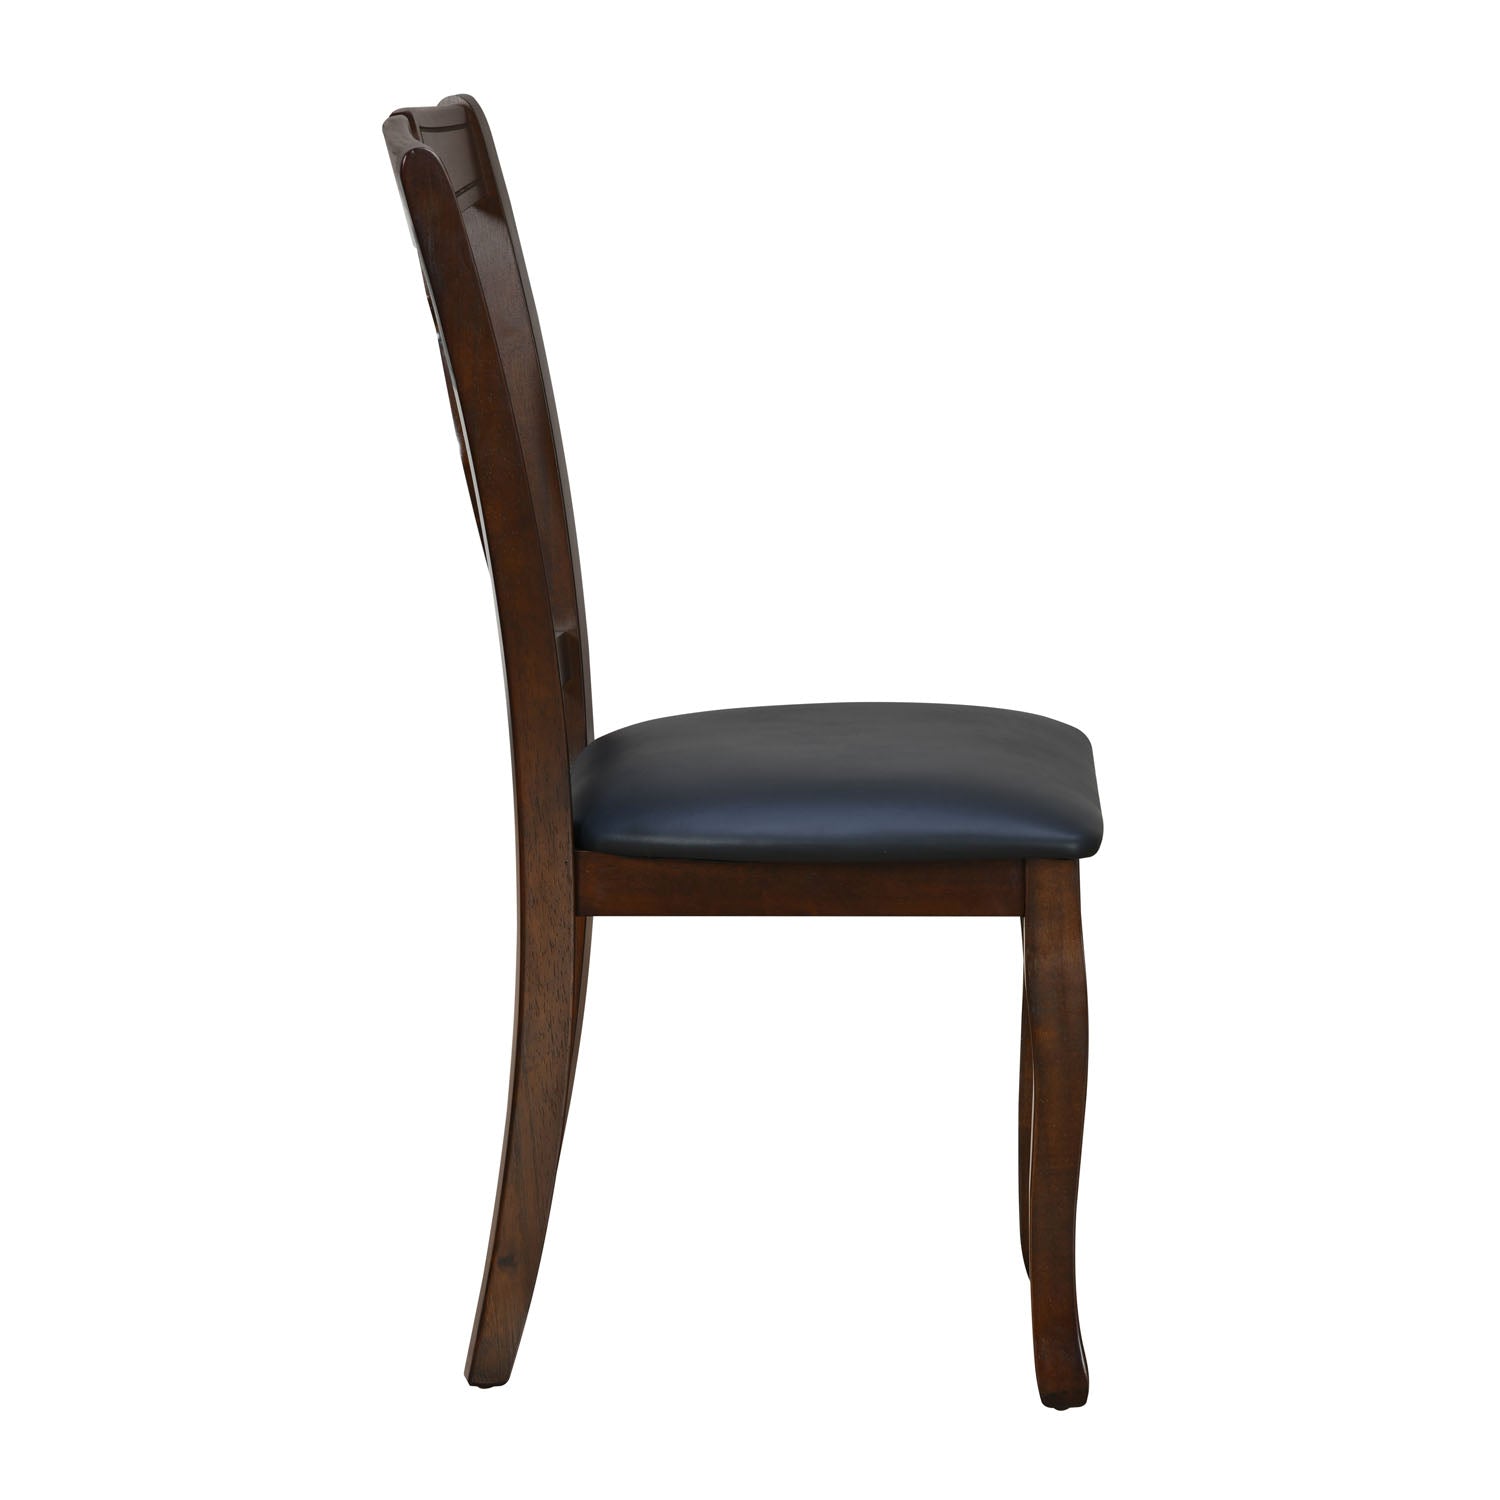 Portsmouth Leatherette Solid Wood Dining Chair Set of 2 (Cappucino)